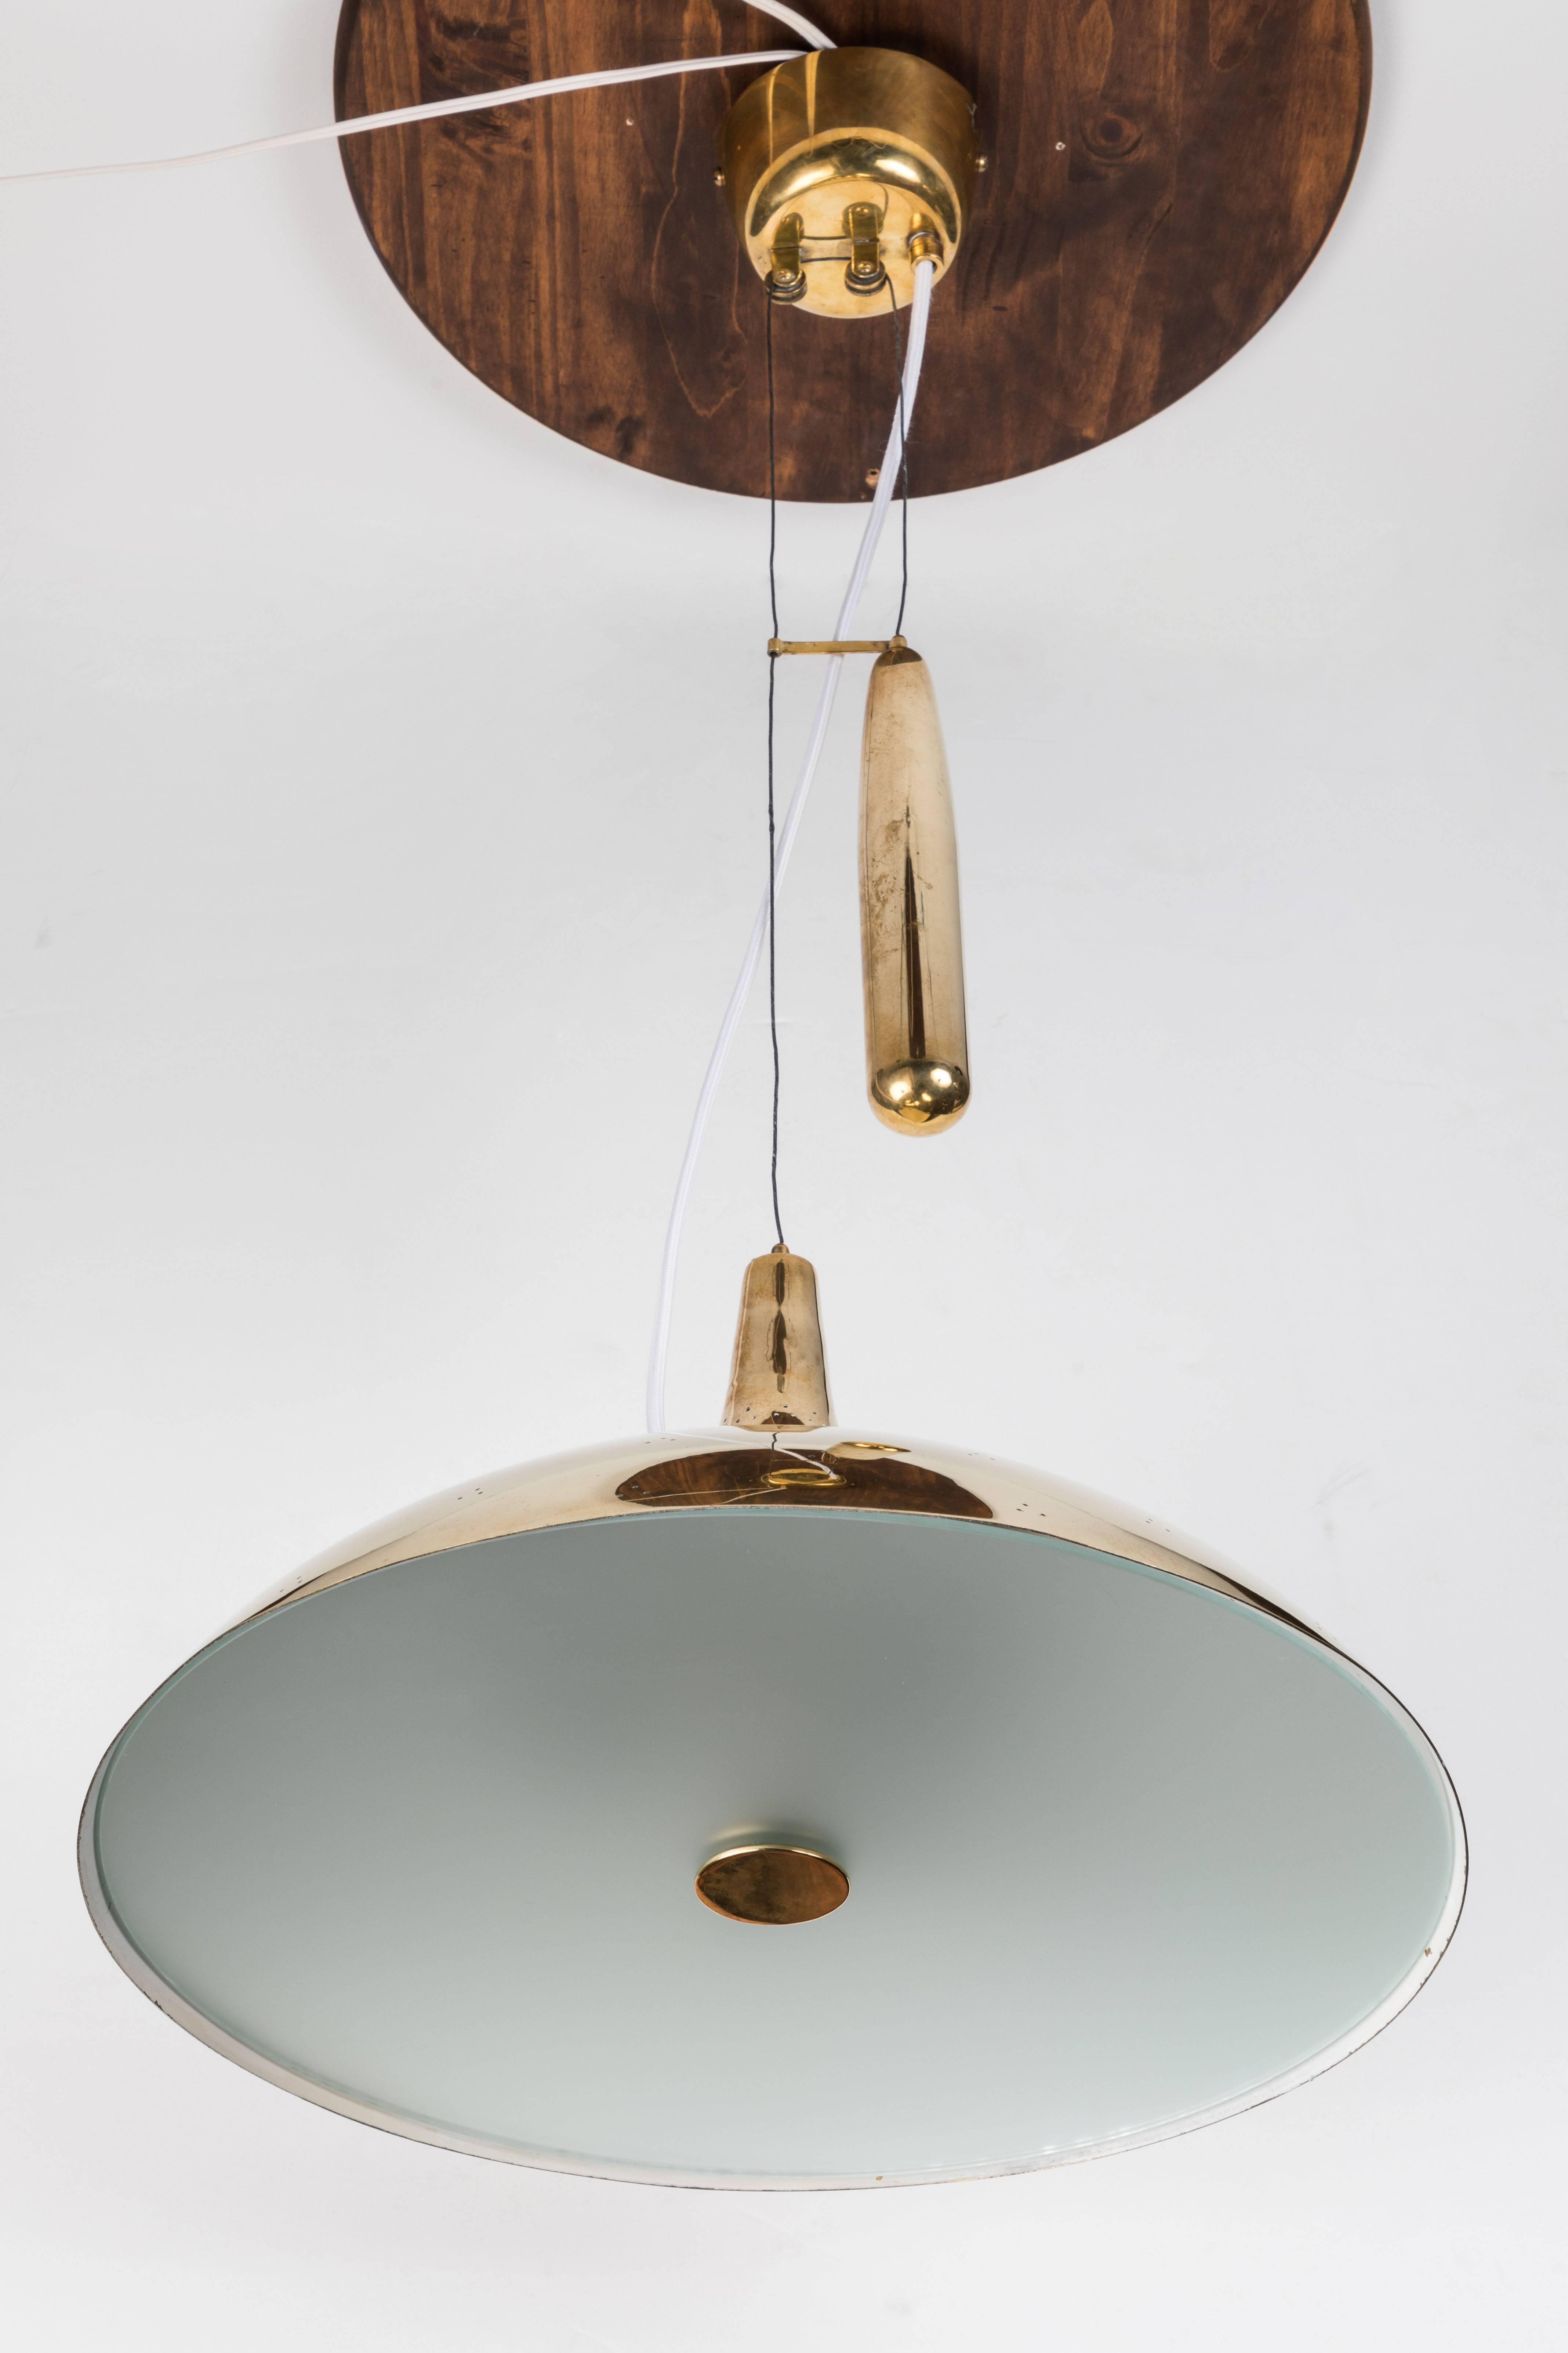 Finnish Paavo Tynell Brass Counterweight Chandelier for Taito Oy